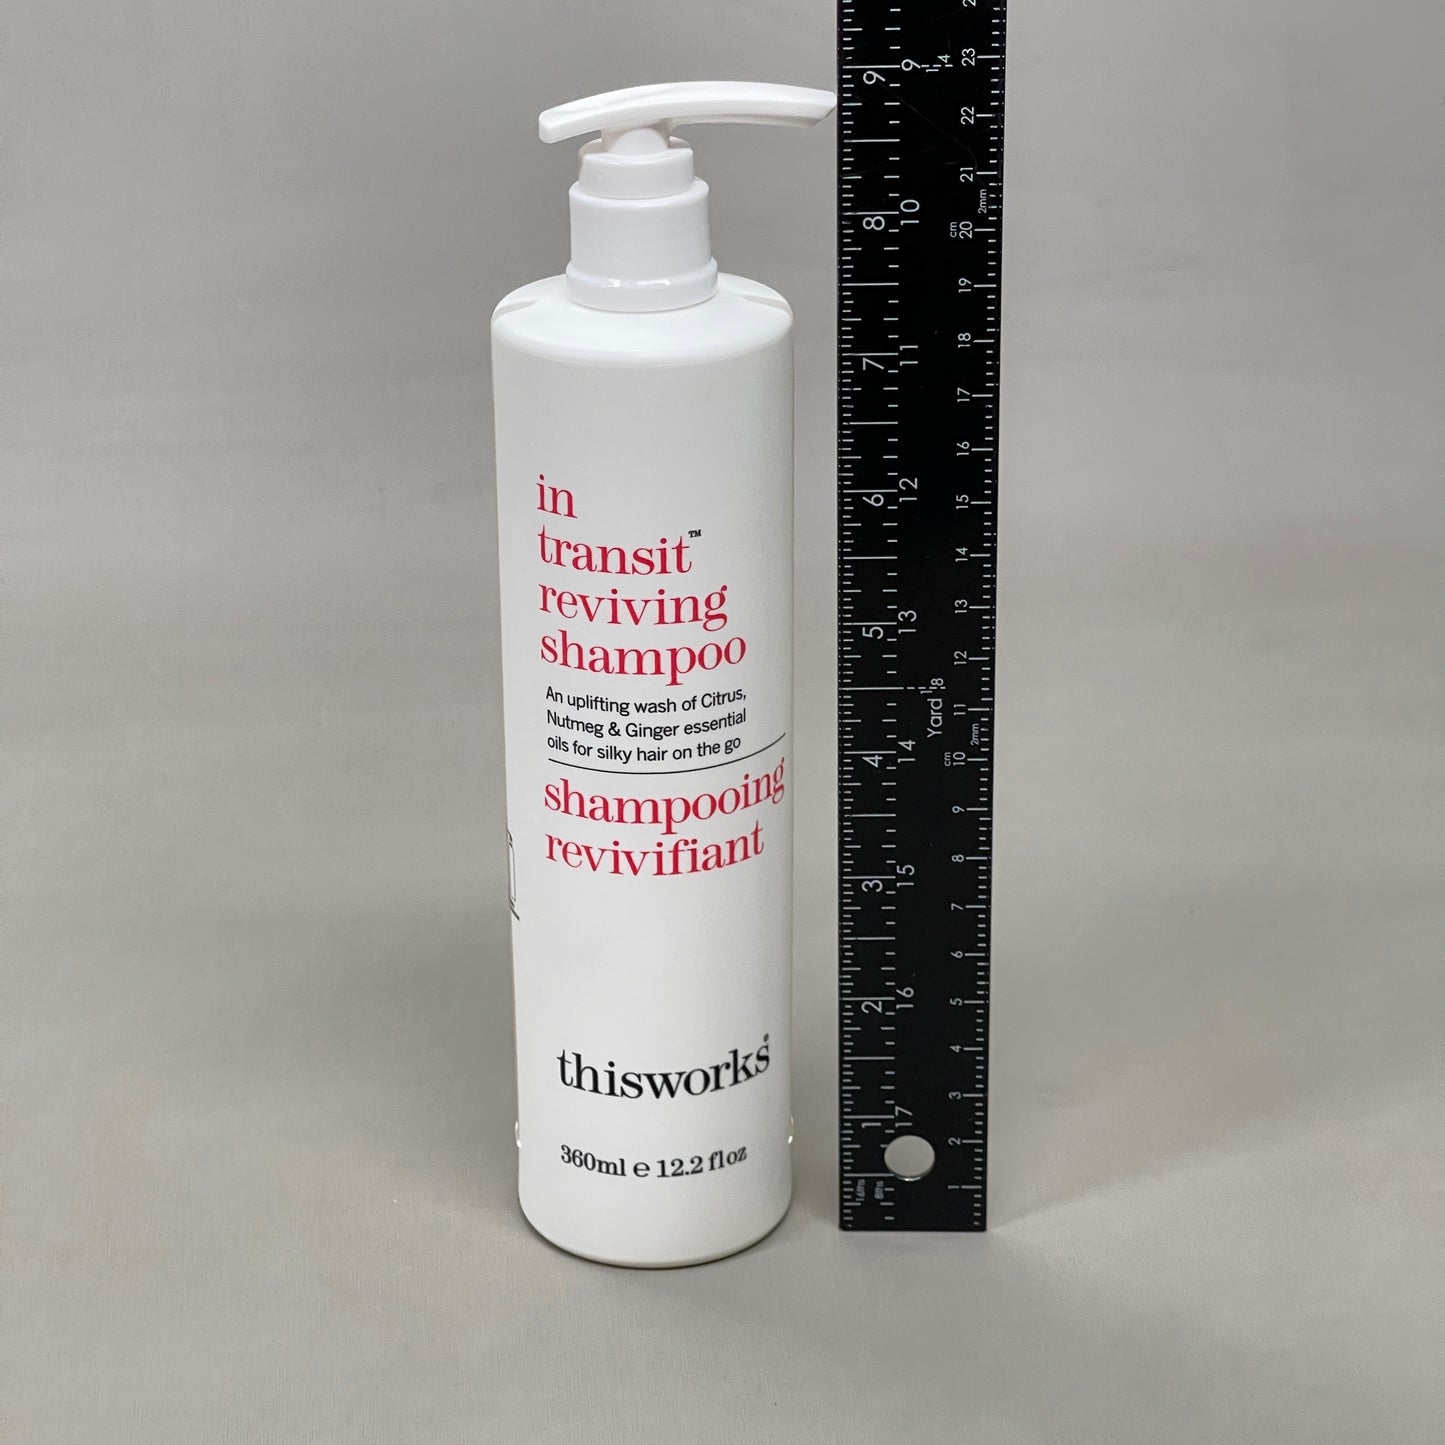 GILCHRIST & SOAMES THISWORKS In Transit Reviving Shampoo 12.2 Fl Oz (New)